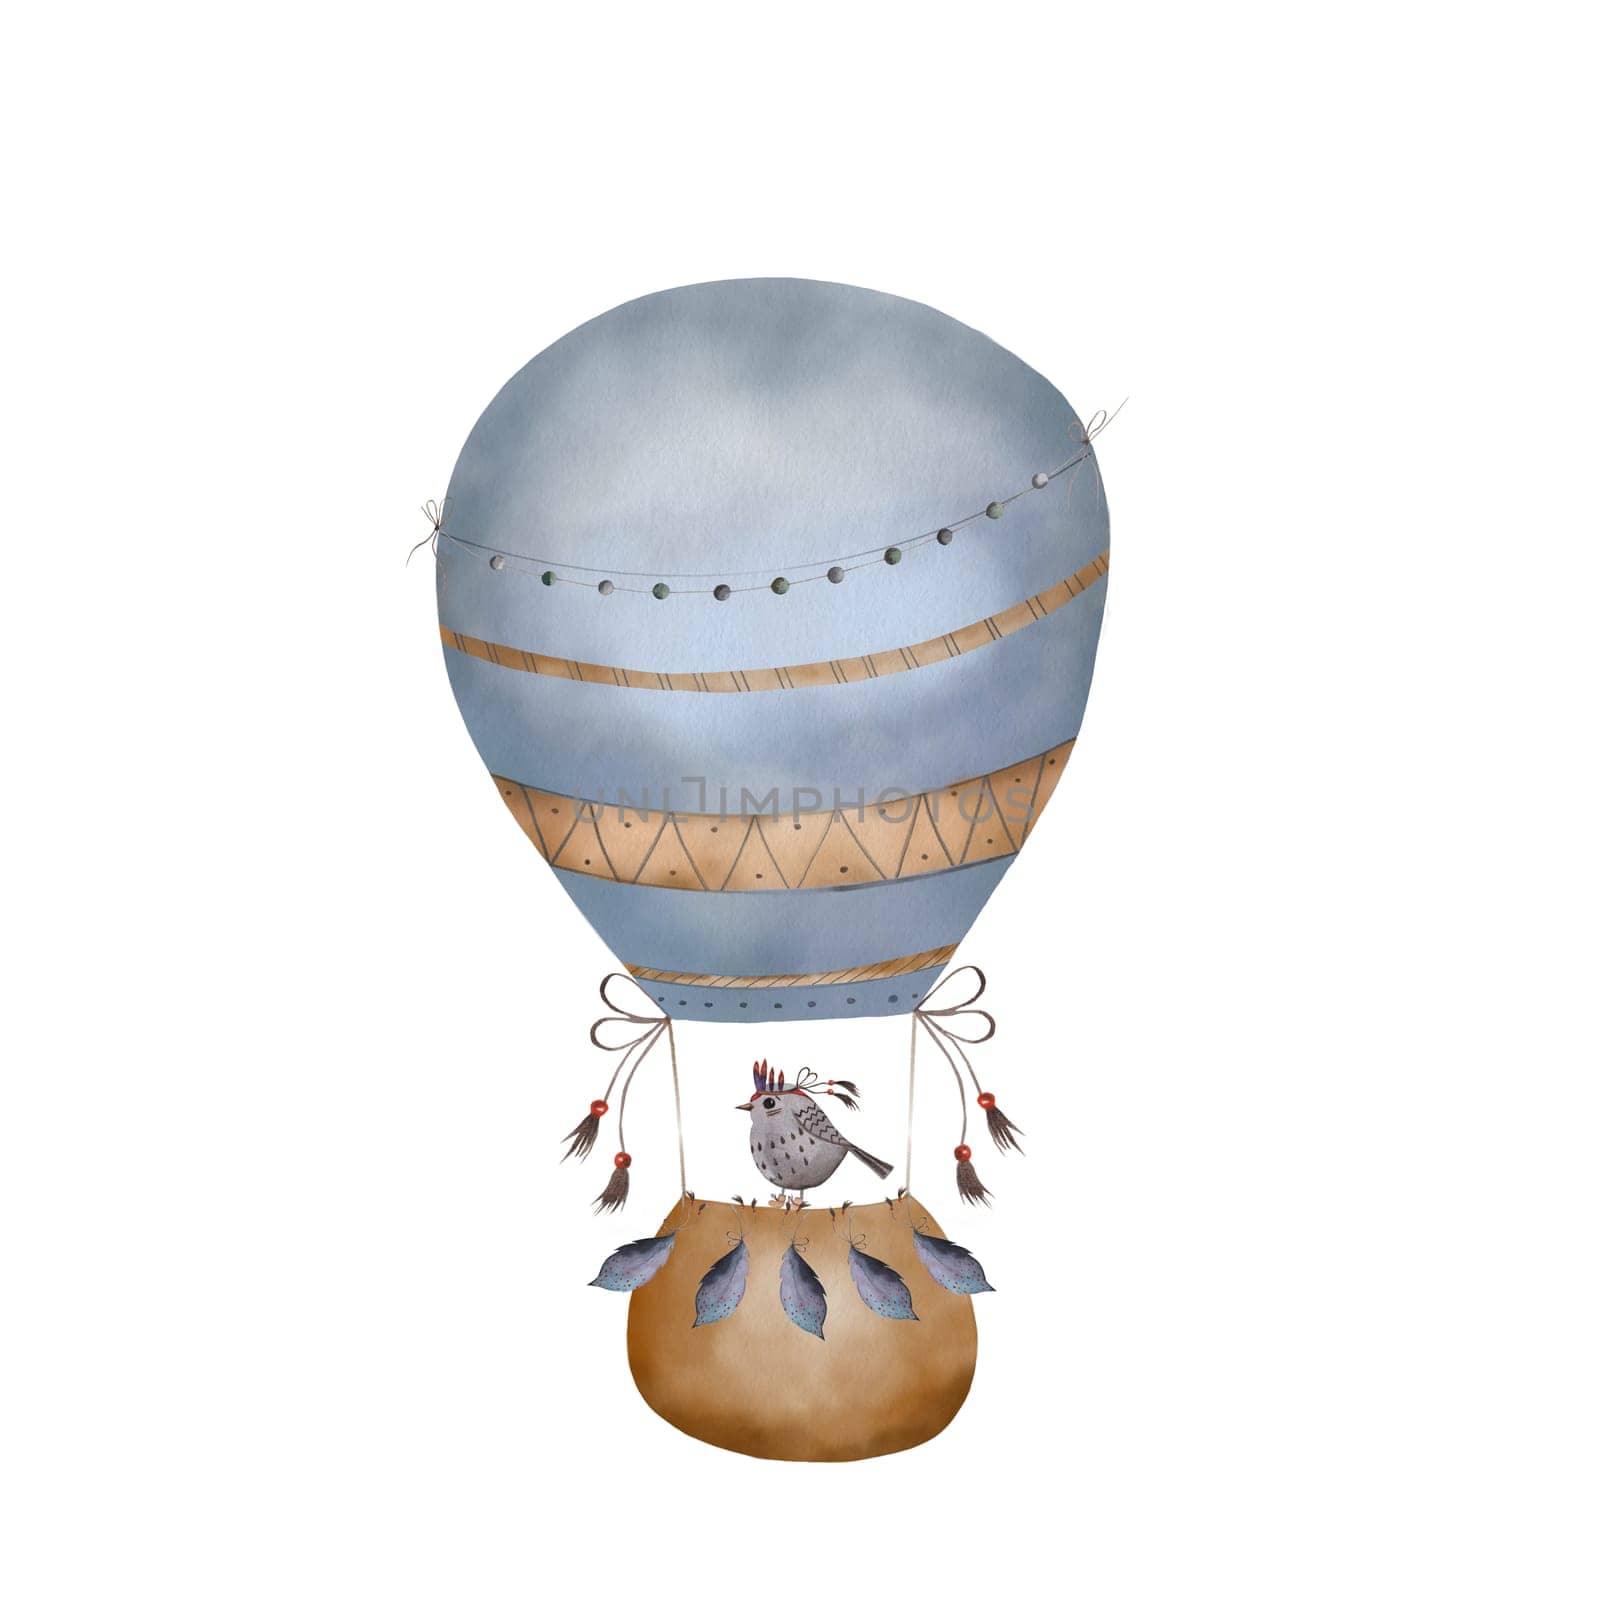 Watercolor blue boho balloon with basket and bird. Hand painted illustration for children's design in cartoon style. Cute hot air painting for logo or print on children's textile in pastel colors. High quality photo